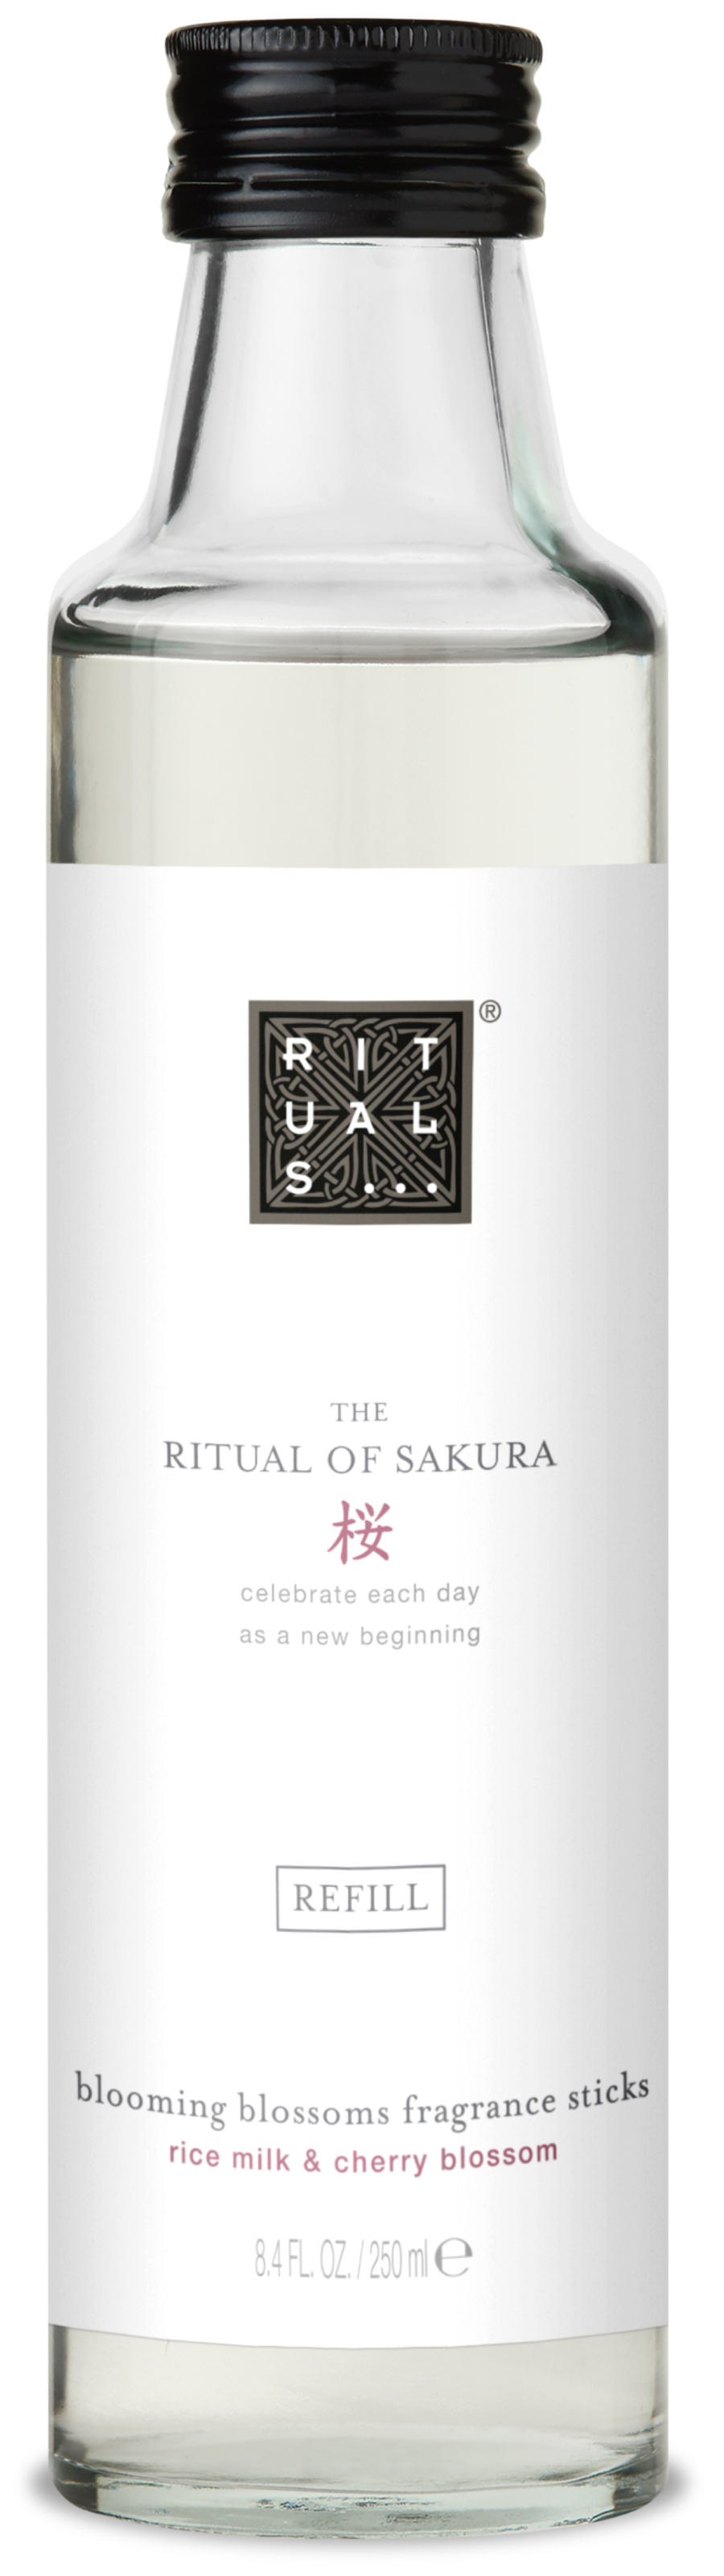 https://lyko.com/globalassets/product-images/rituals-the-ritual-of-sakura-refill-fragrance-sticks-250ml-1808-704-0250_1.png?ref=D76F6798C5&w=900&h=3200&quality=75